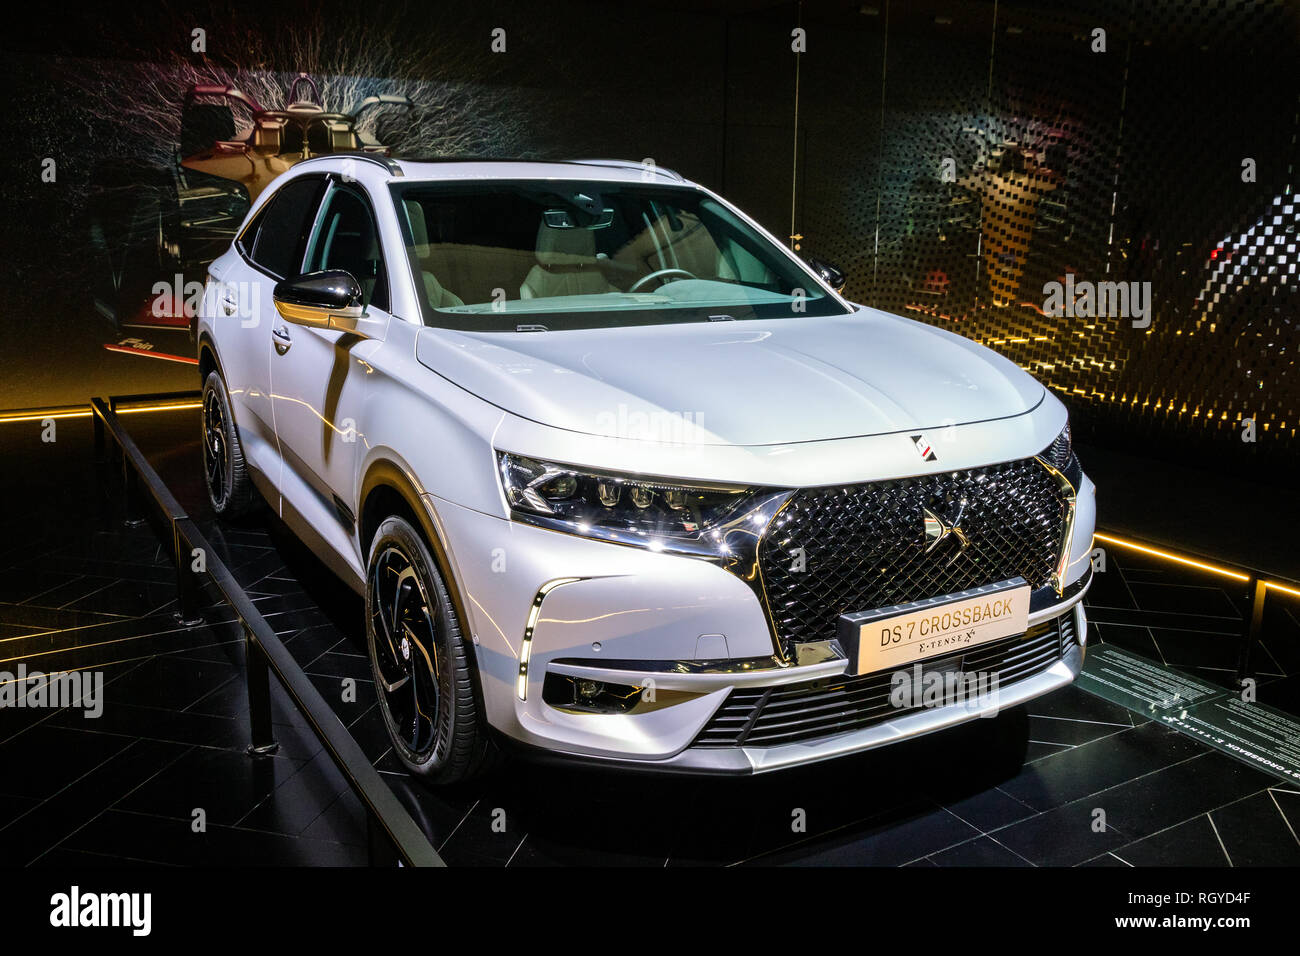 BRUSSELS - JAN 18, 2019: Citroen DS 7 Crossback E-Tense 4x4 car showcased  at the 97th Brussels Motor Show 2019 Autosalon Stock Photo - Alamy